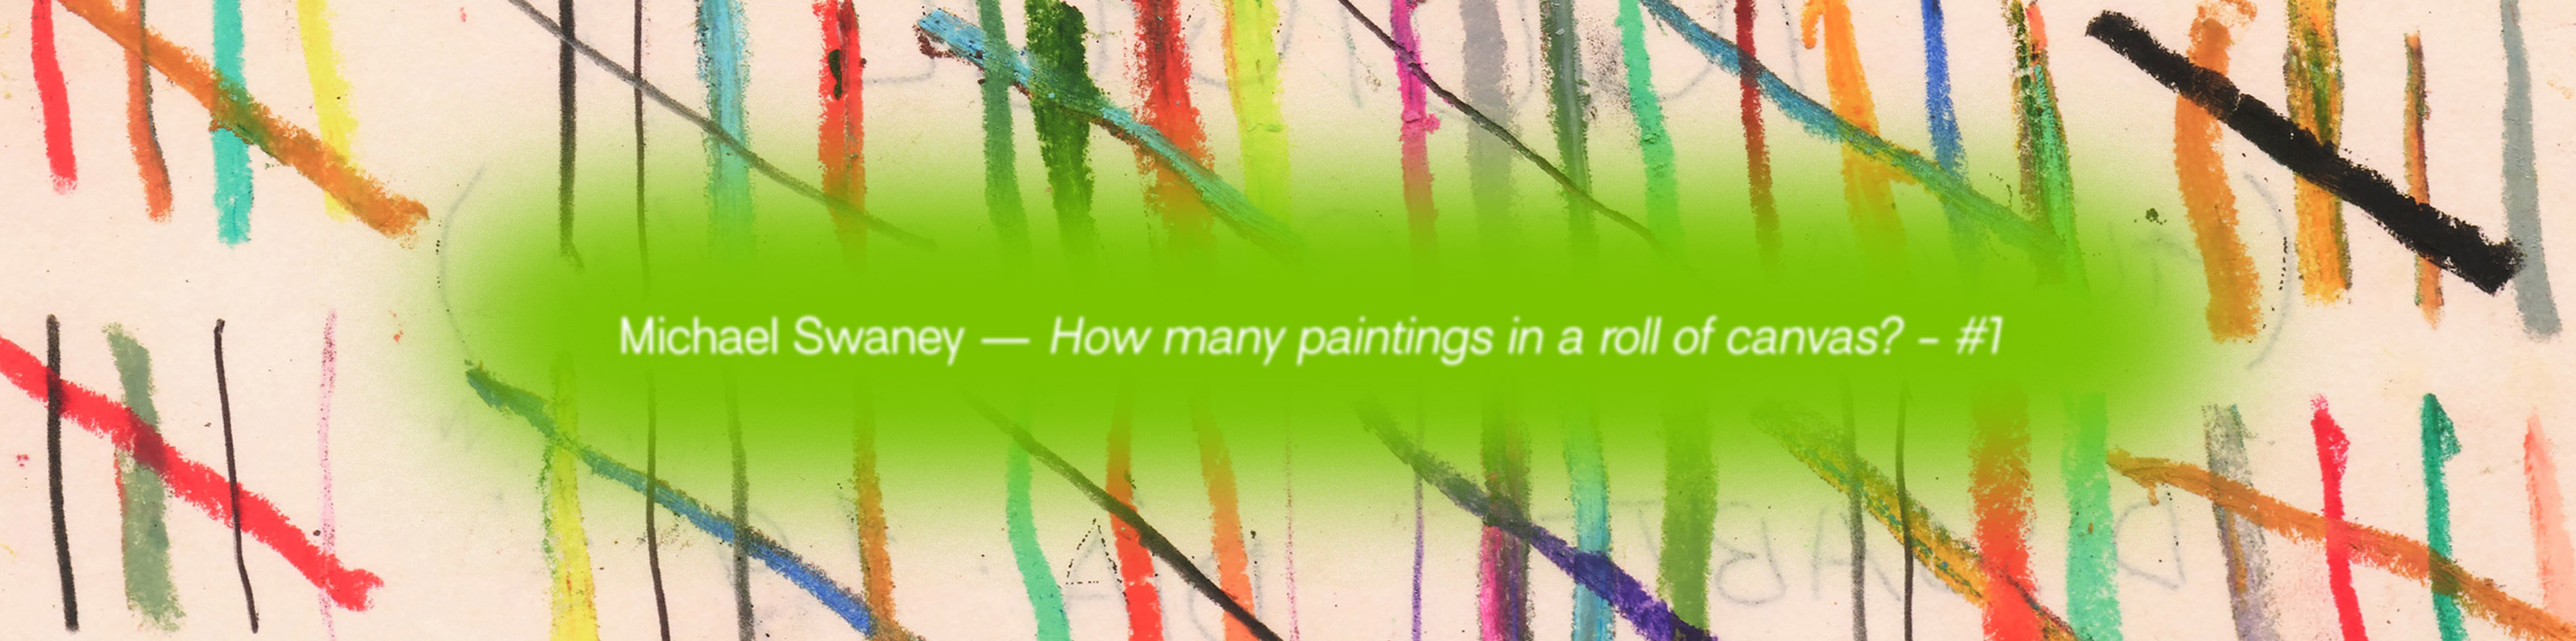 Michael Swaney - How many paintings in a roll of canvas?